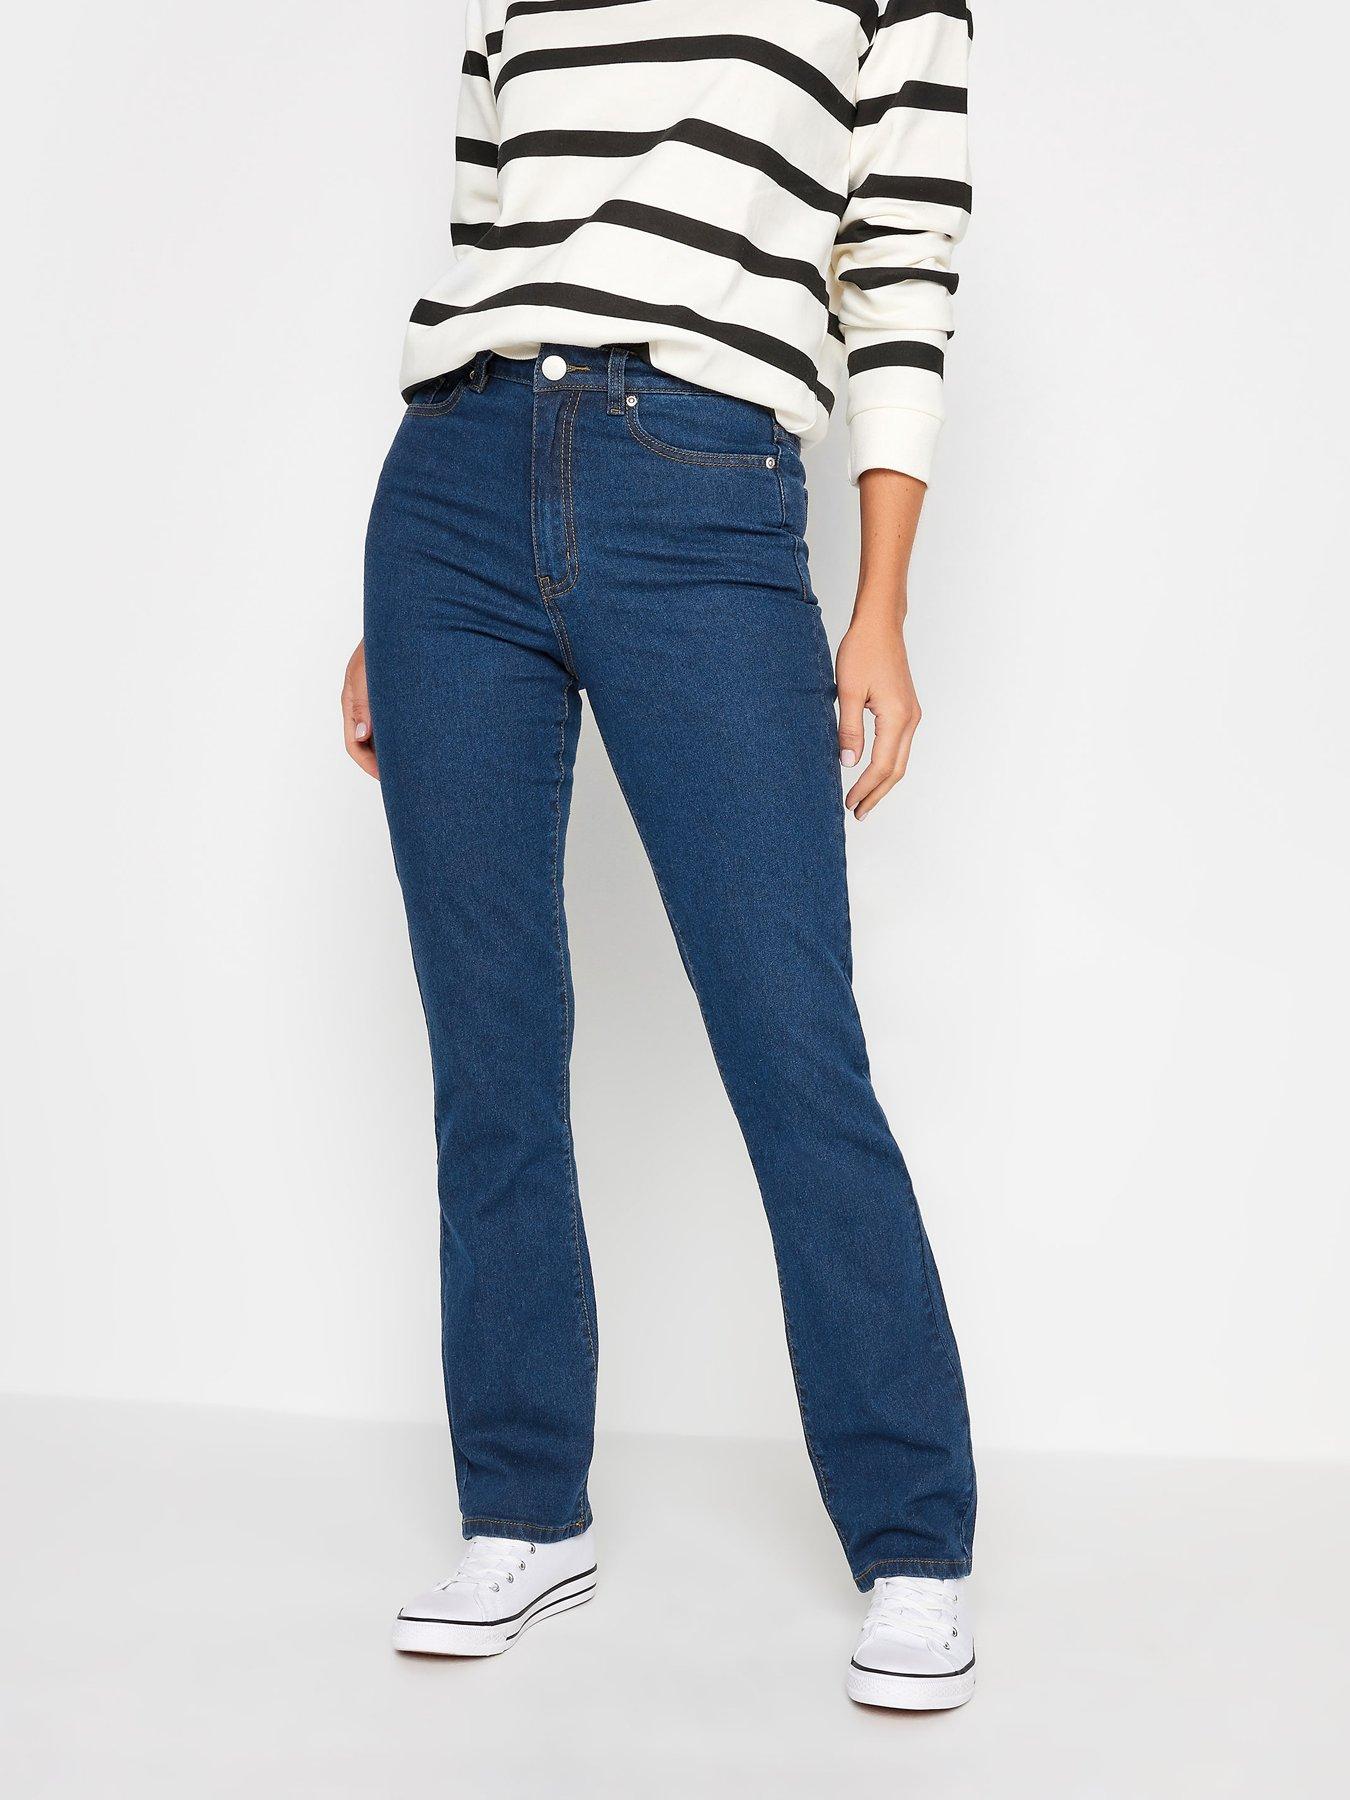 Mid Blue Thigh Slimmer Shaper Jeans by In the Style X Jac Jossa